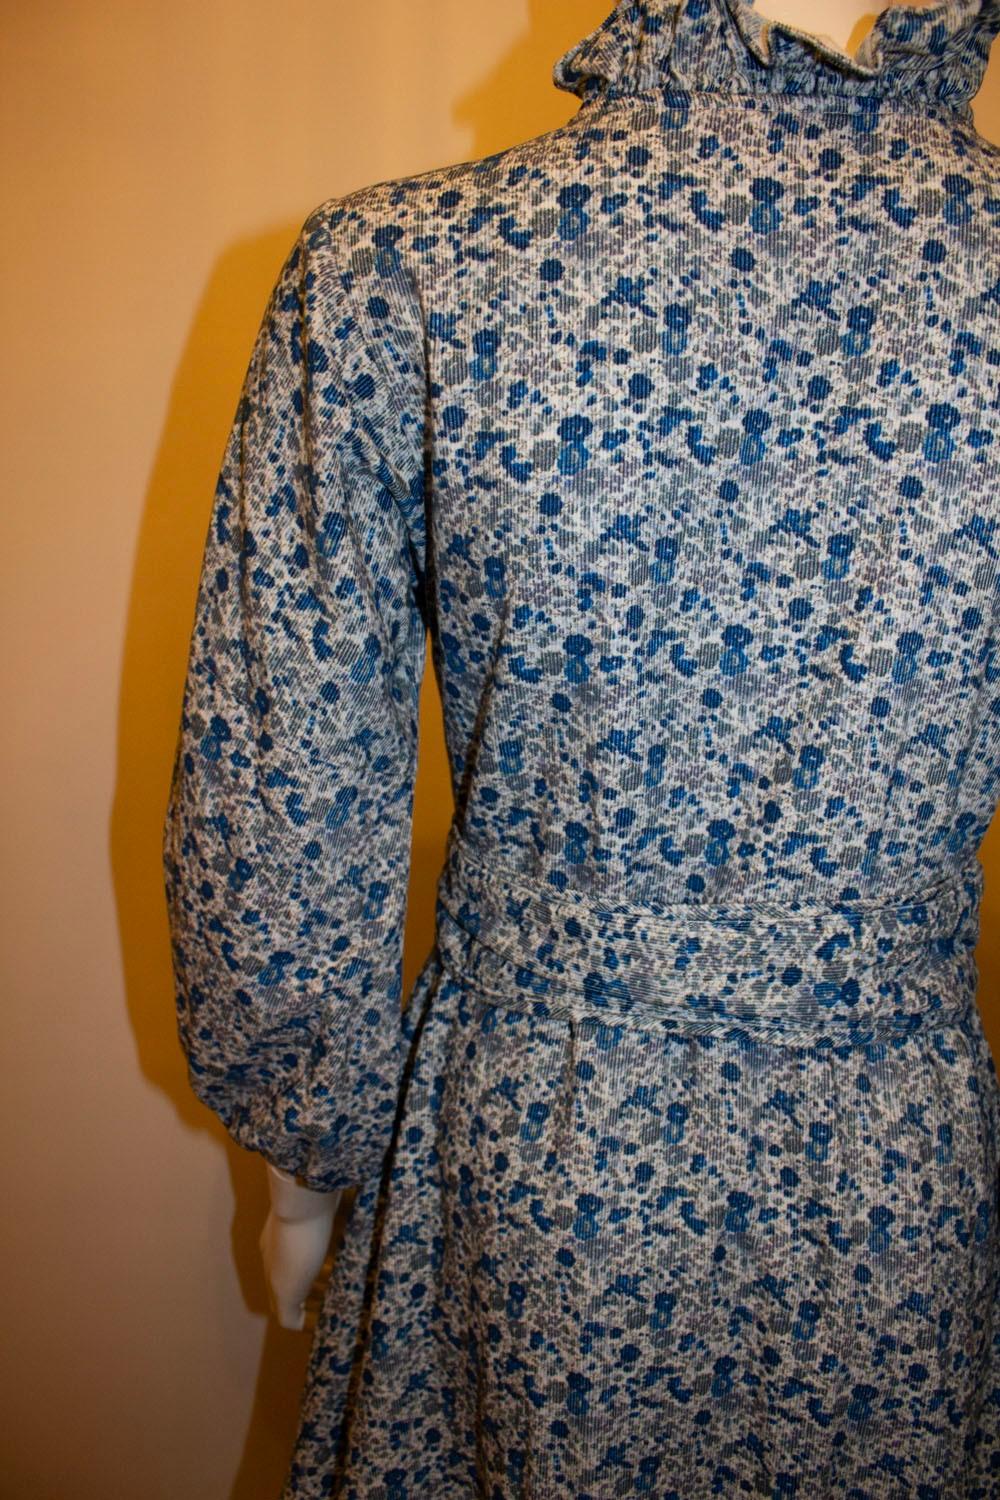 A pretty and practical dress for Spring by Seraphina of London. The dress is in  a light weight corduroy with a pretty blue floral print. The dress is lined in cotton and hangs beautifully. It has a frill collar, button front opening with pin tucks,